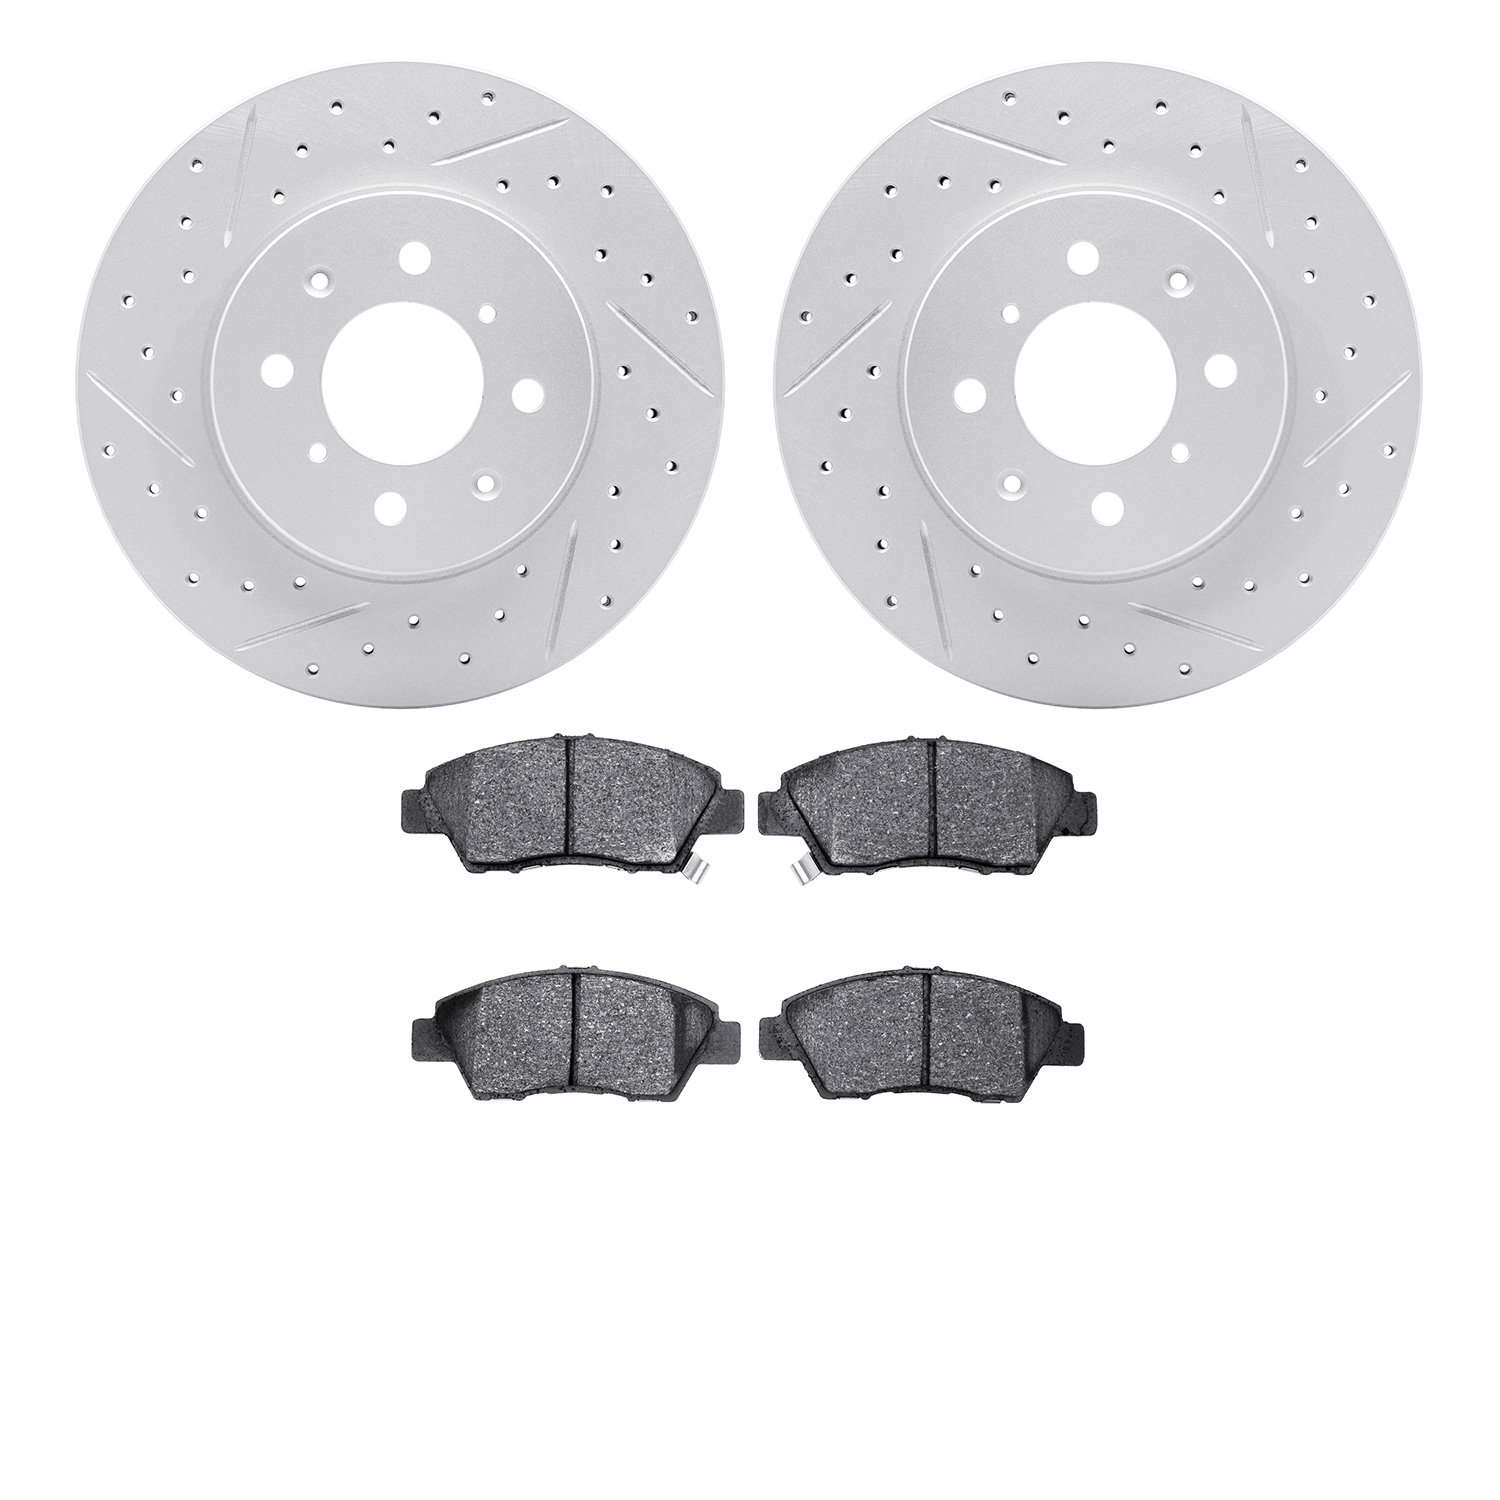 2502-59011 Geoperformance Drilled/Slotted Rotors w/5000 Advanced Brake Pads Kit, 2009-2014 Acura/Honda, Position: Front